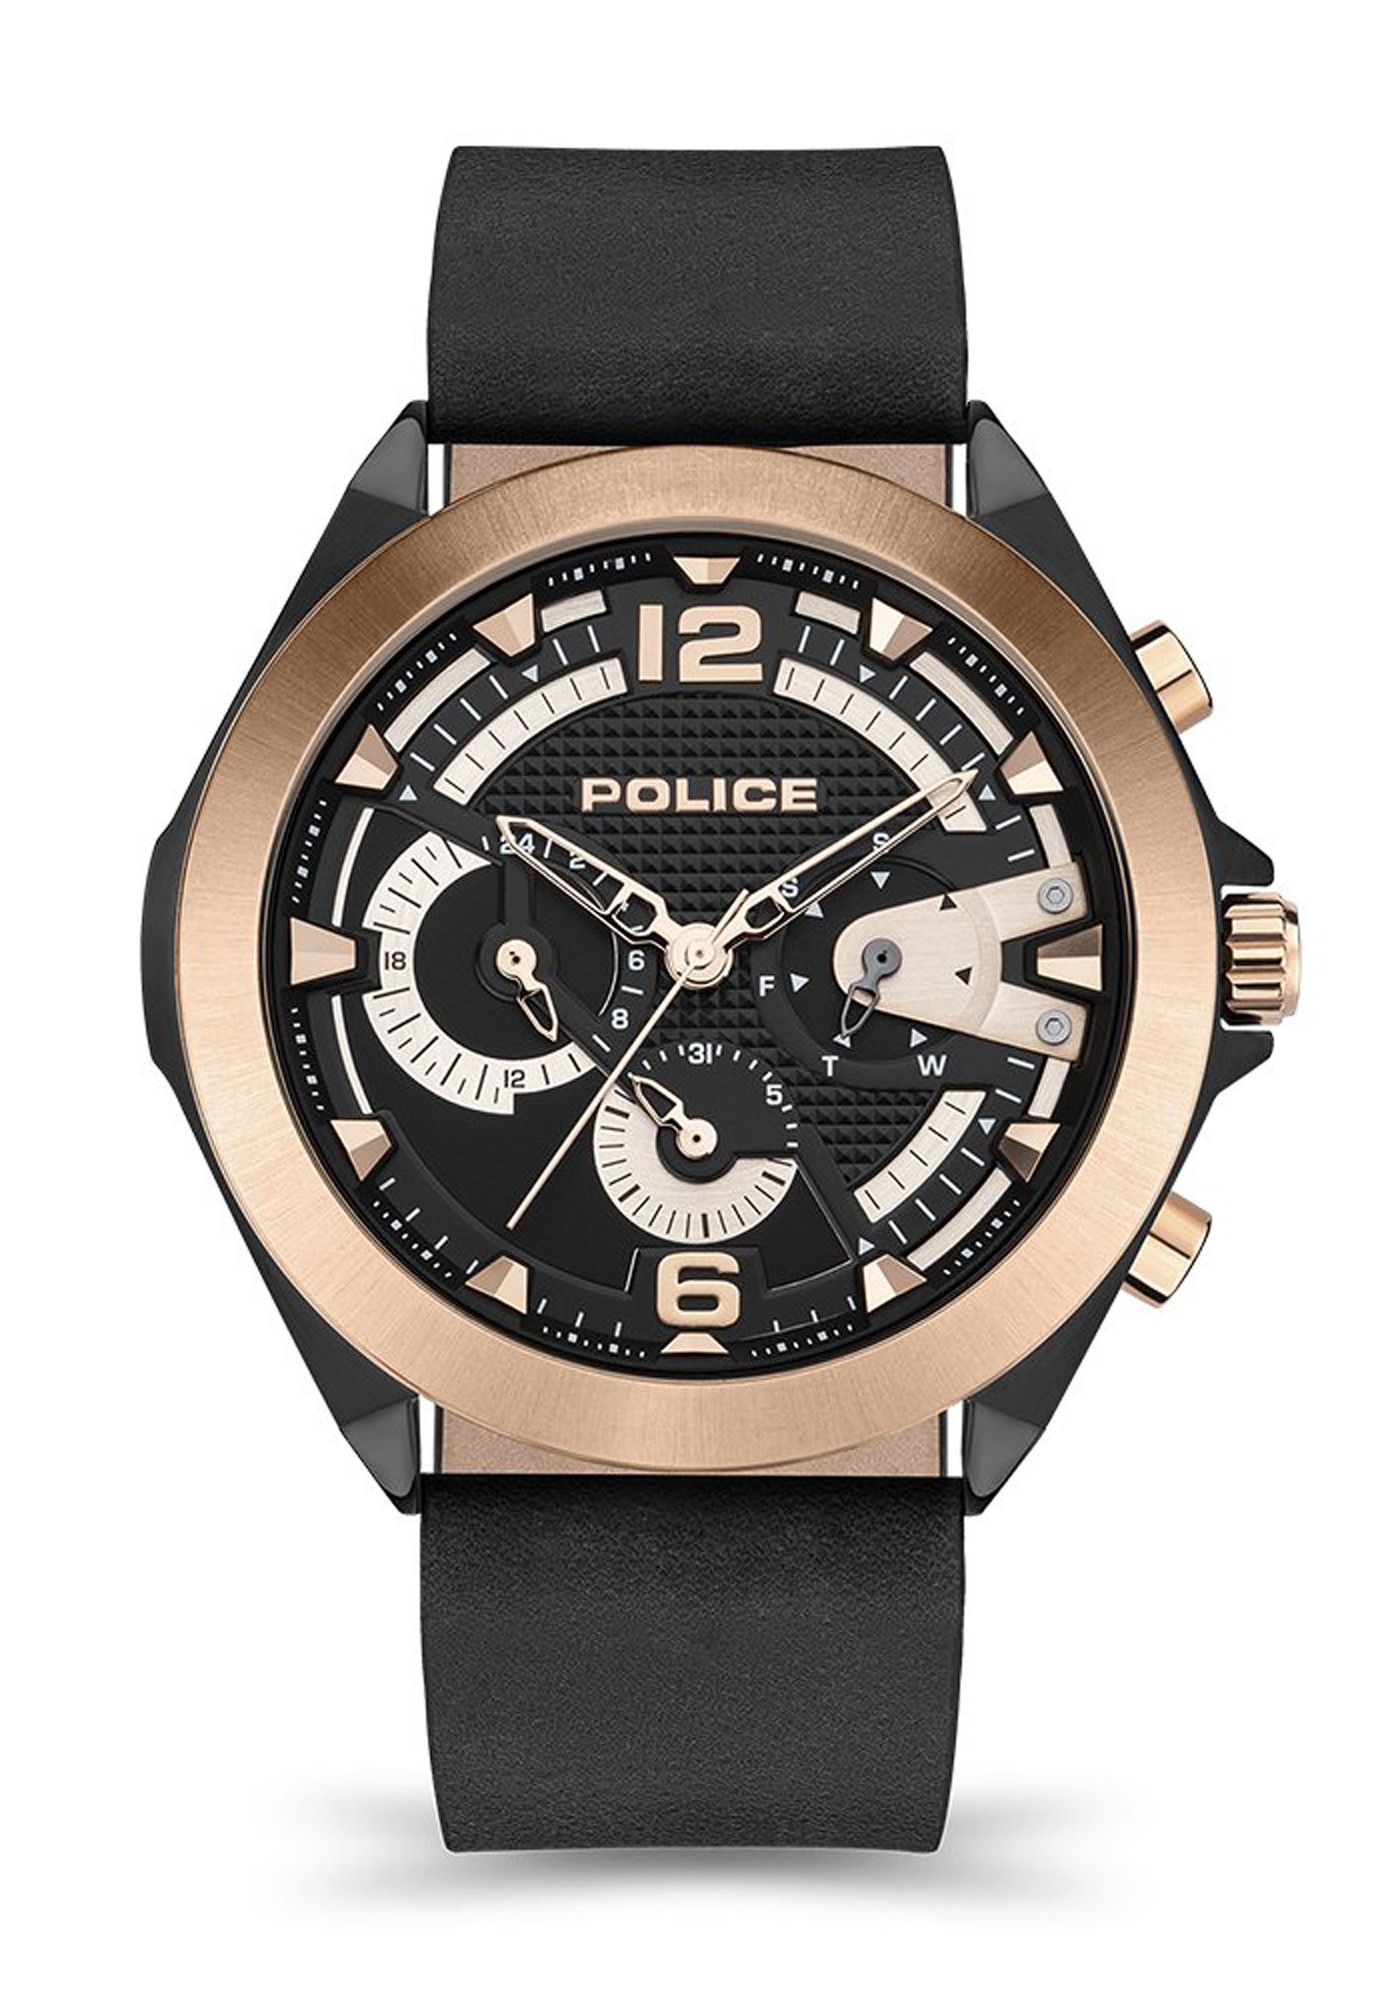 Police Men's Watch Police Watches Zenith Stainless Steel Men's Watch With  Two Tone Dial and Black Leather Strap 152239 PEWJF2108740 | Comprar Watch  Police Watches Zenith Stainless Steel Men's Watch With Two